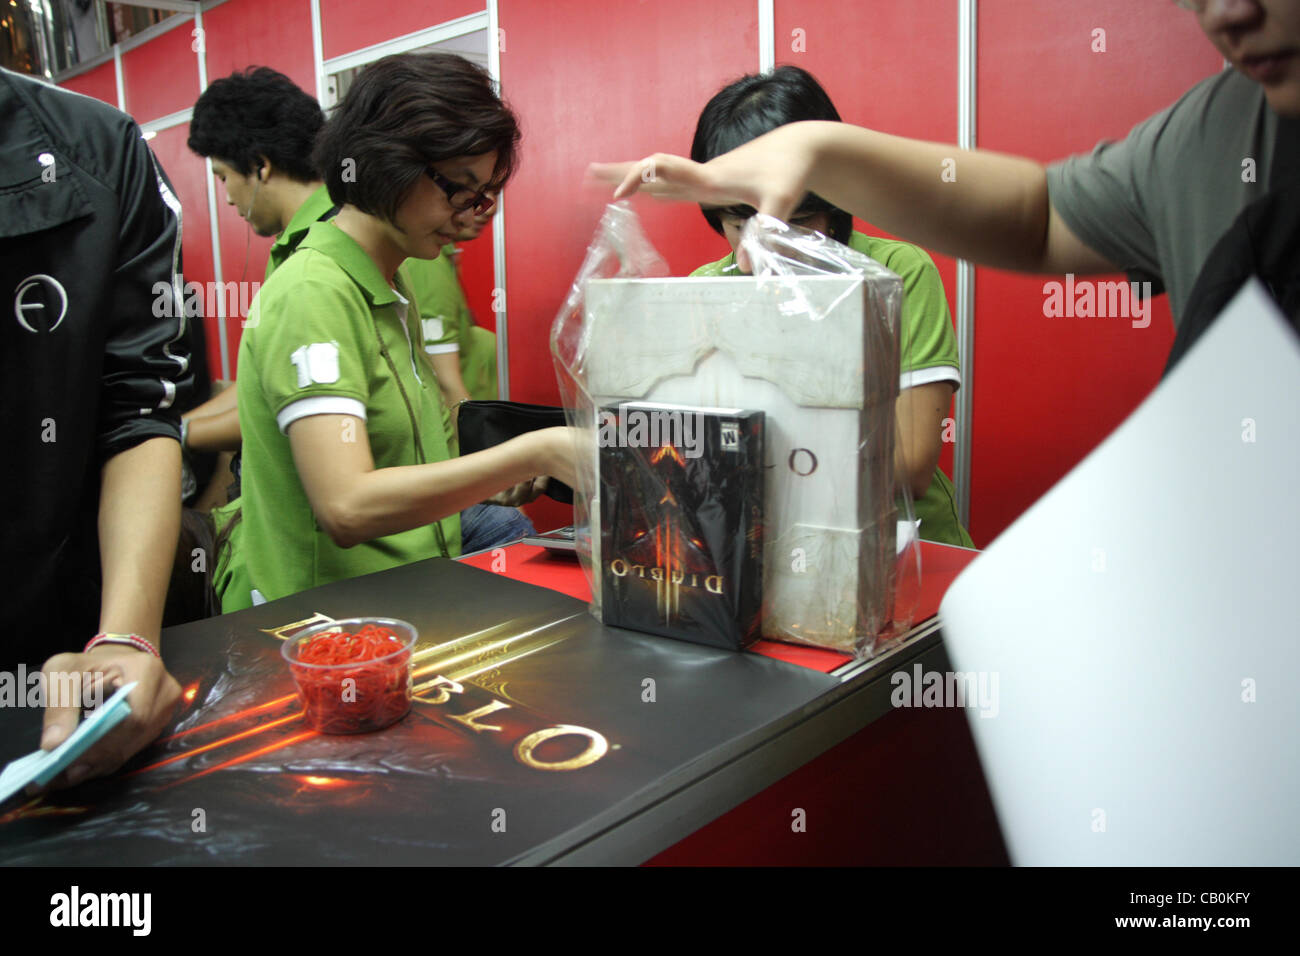 May 15, 2012, Siam Paragon , Bangkok , Thailand . Thousand of gamers buying ' Diablo 3' , an action role-playing game by Blizzard Entertainment after waiting for 12 year . Stock Photo